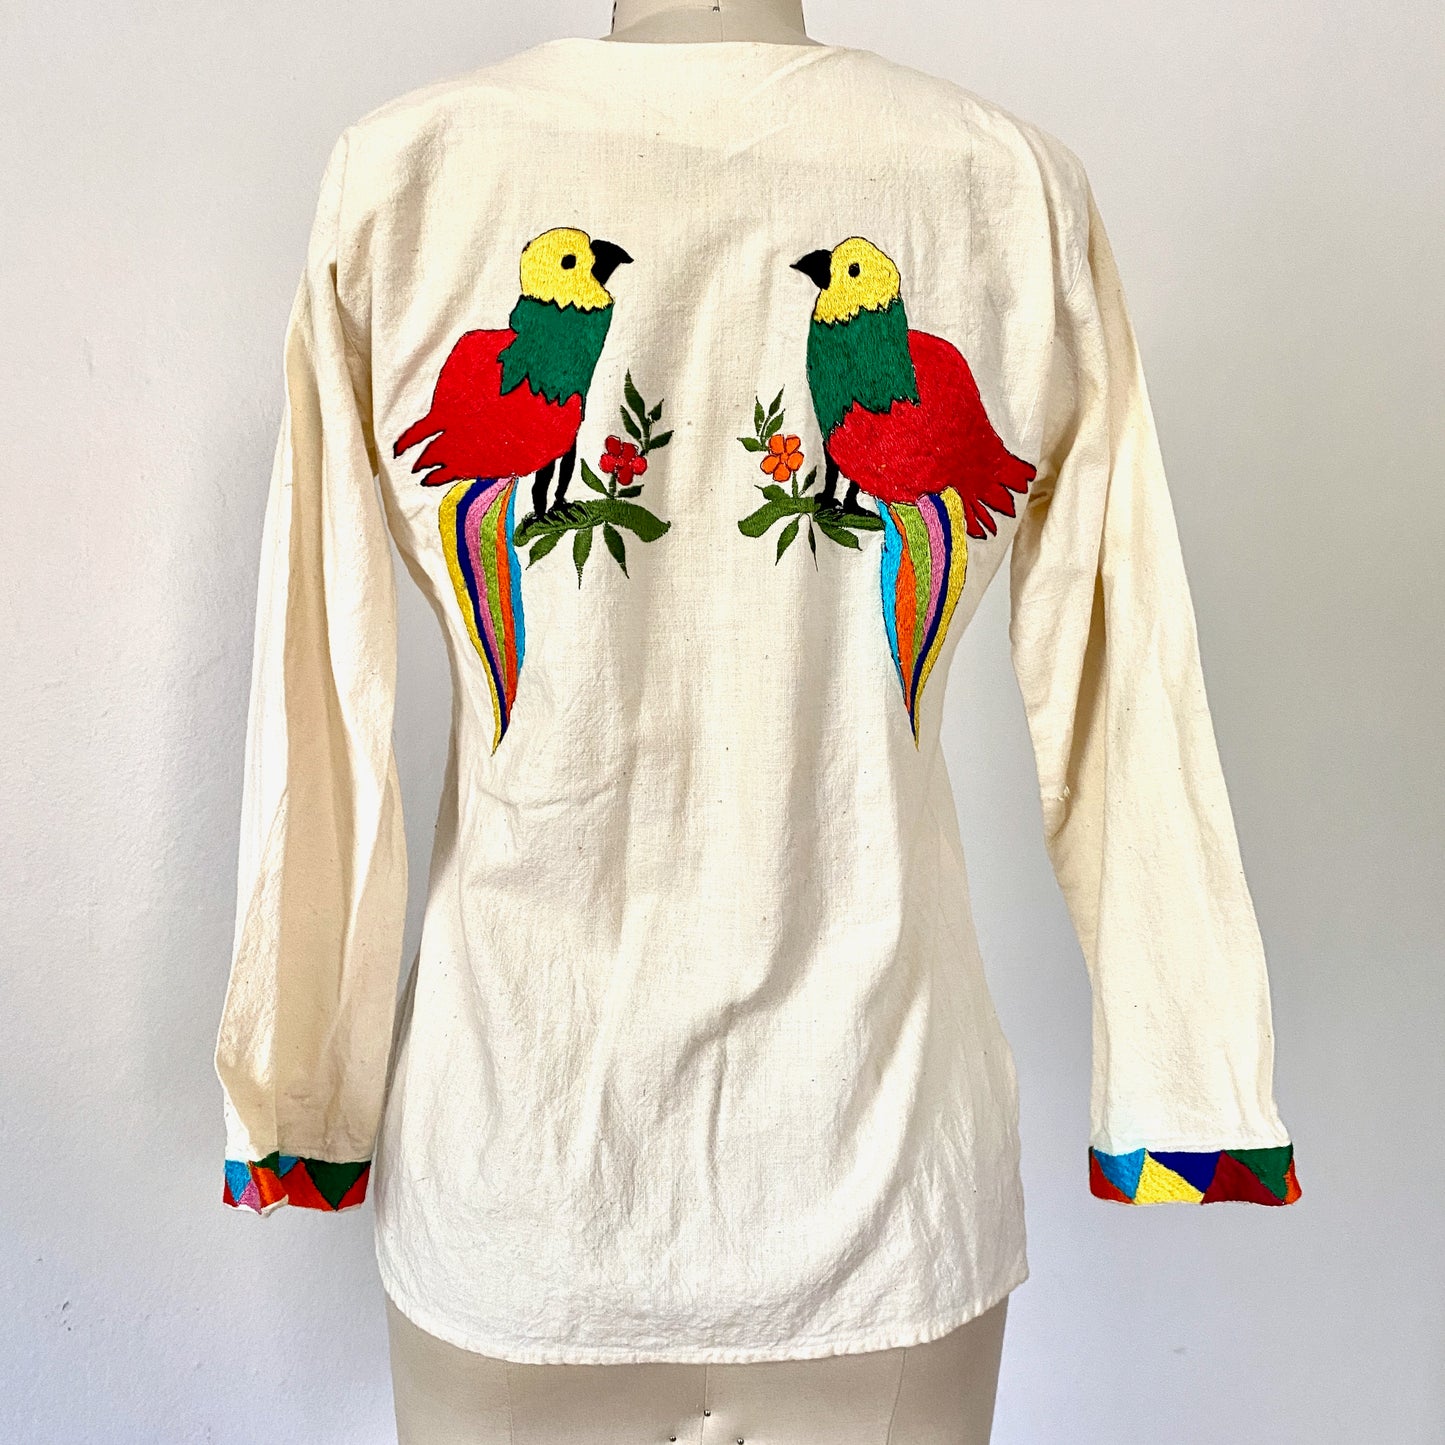 Vintage Hand Embroidered Puebla Los Ranchos Blouse with A Bull and Beautiful Birds Flowers Frida style